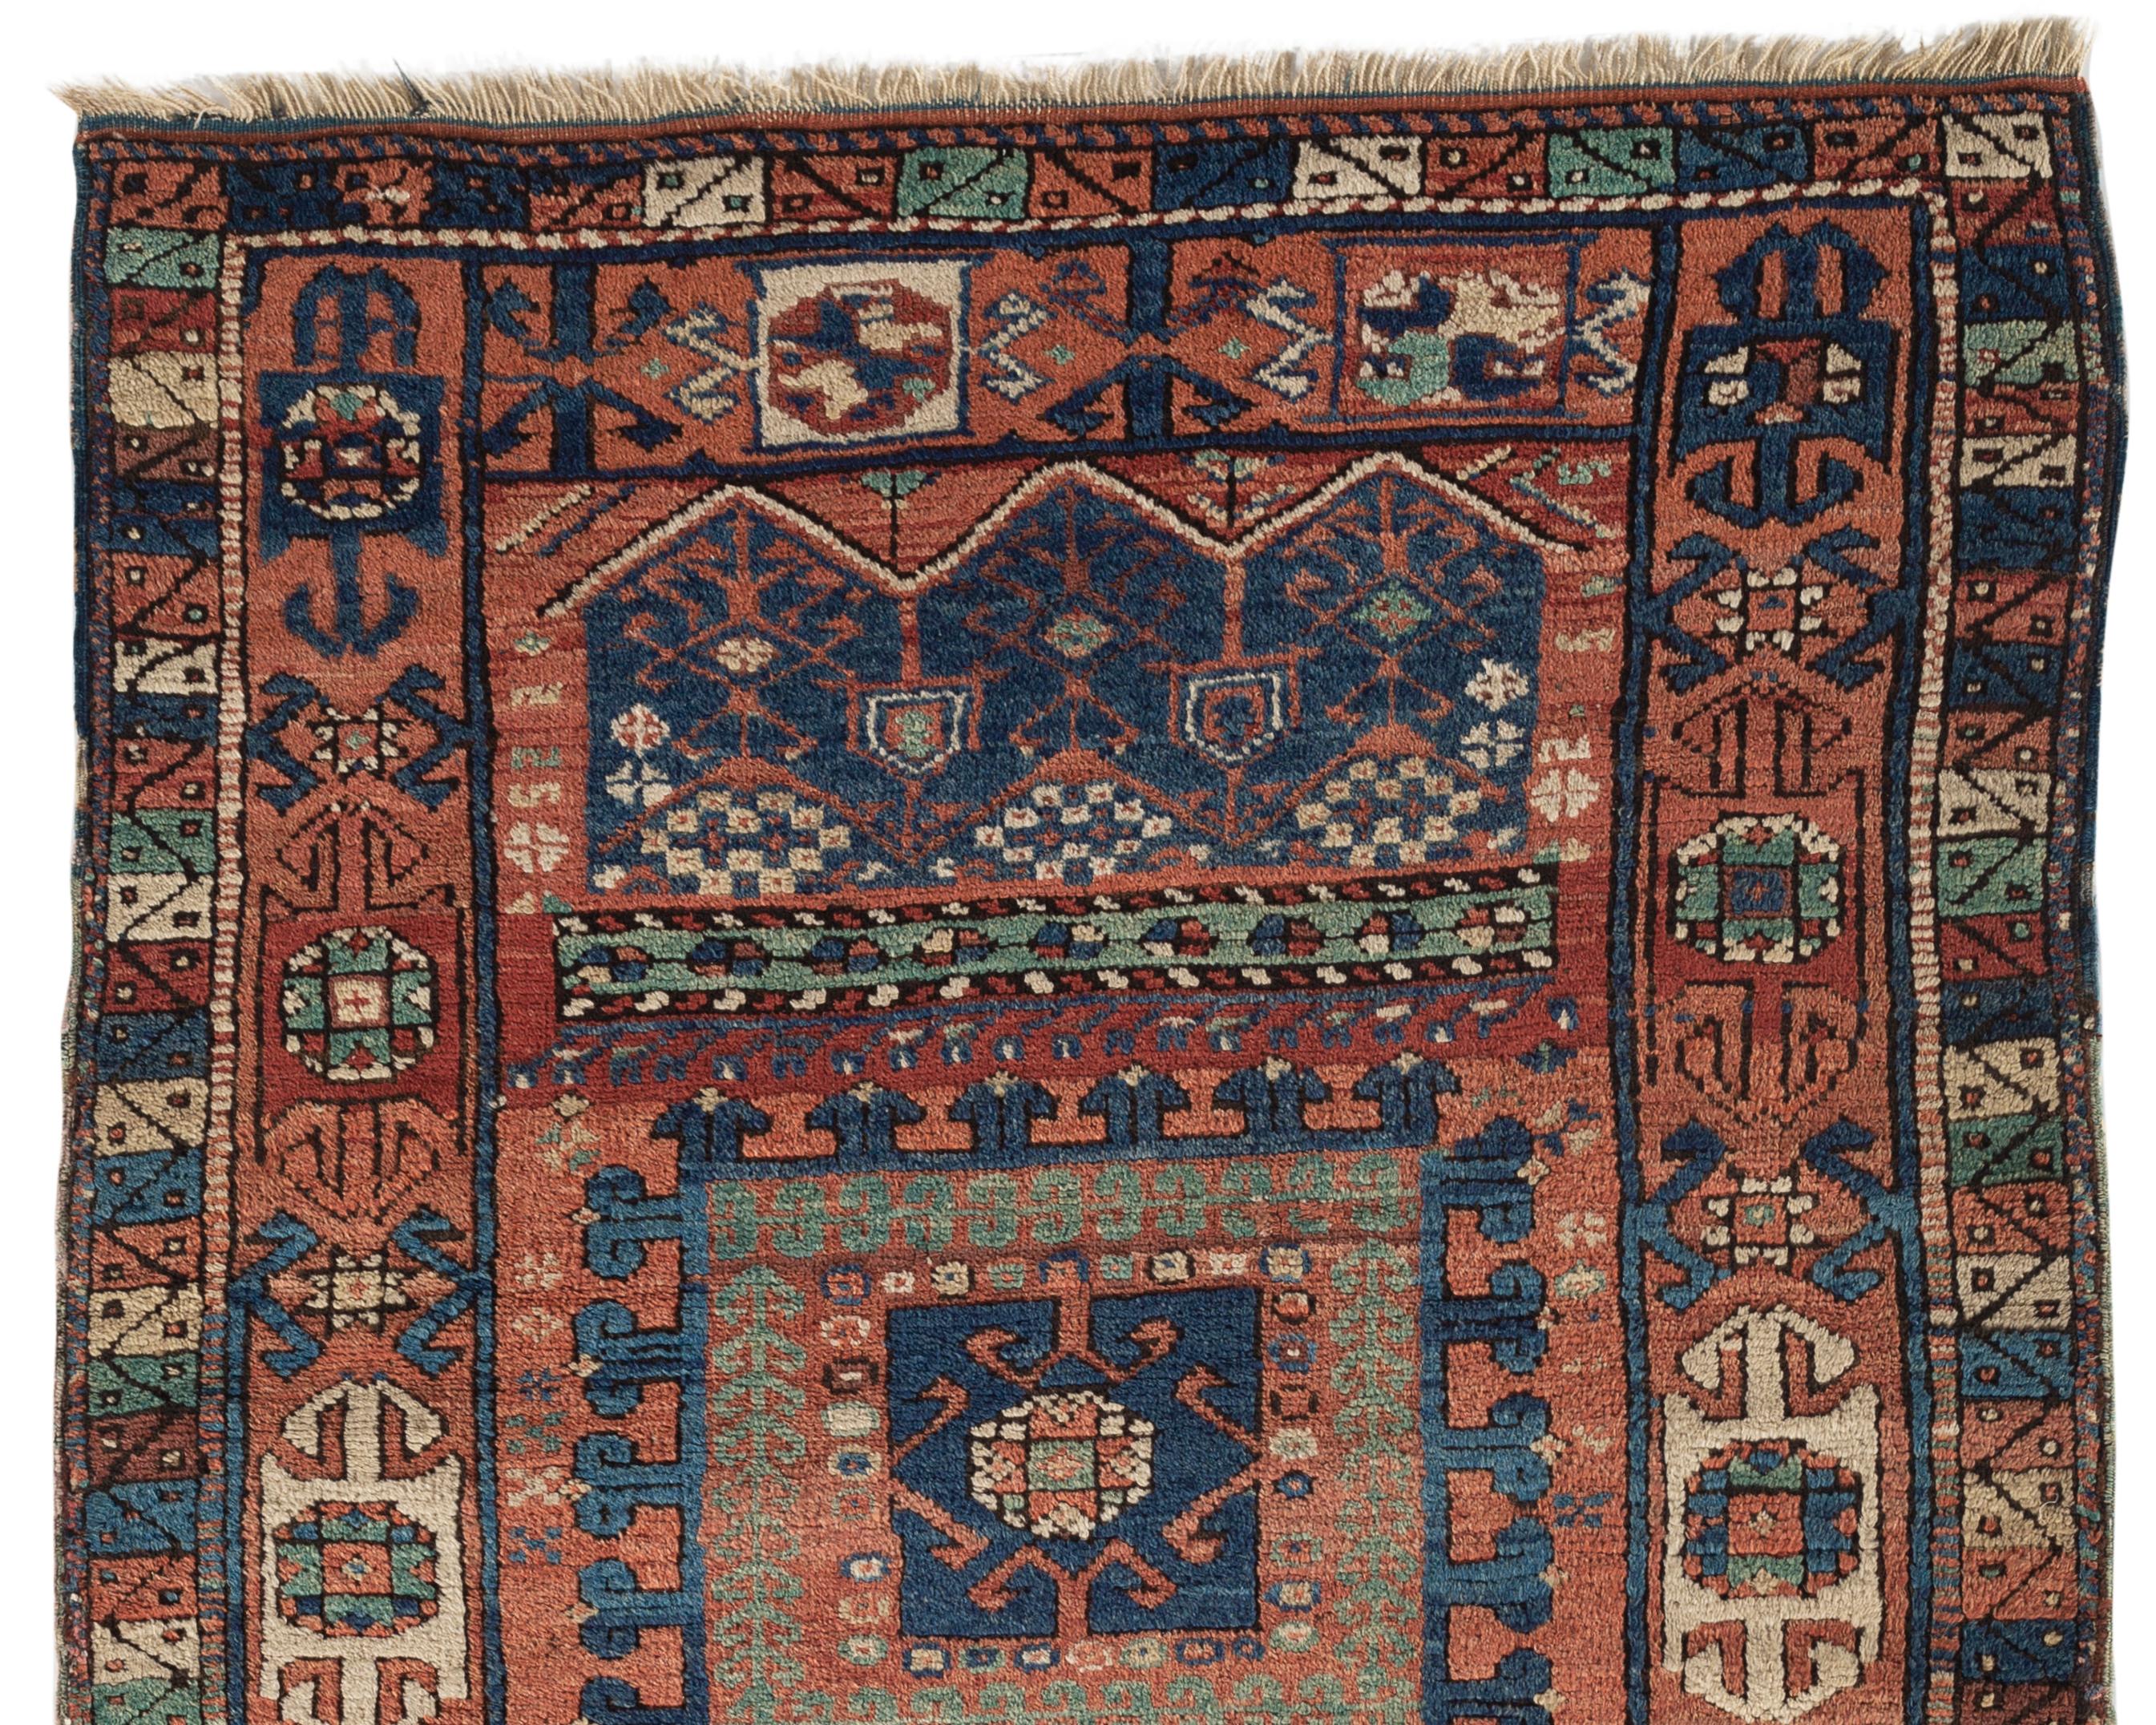 Antique Turkish Ghiordes rug, circa 1900. Ghiordes rugs come from Western Anatolia in Turkey, the rugs from this area use the highest quality wool and are on a cotton foundation creating beautiful and study rugs. This particular rug has a superb